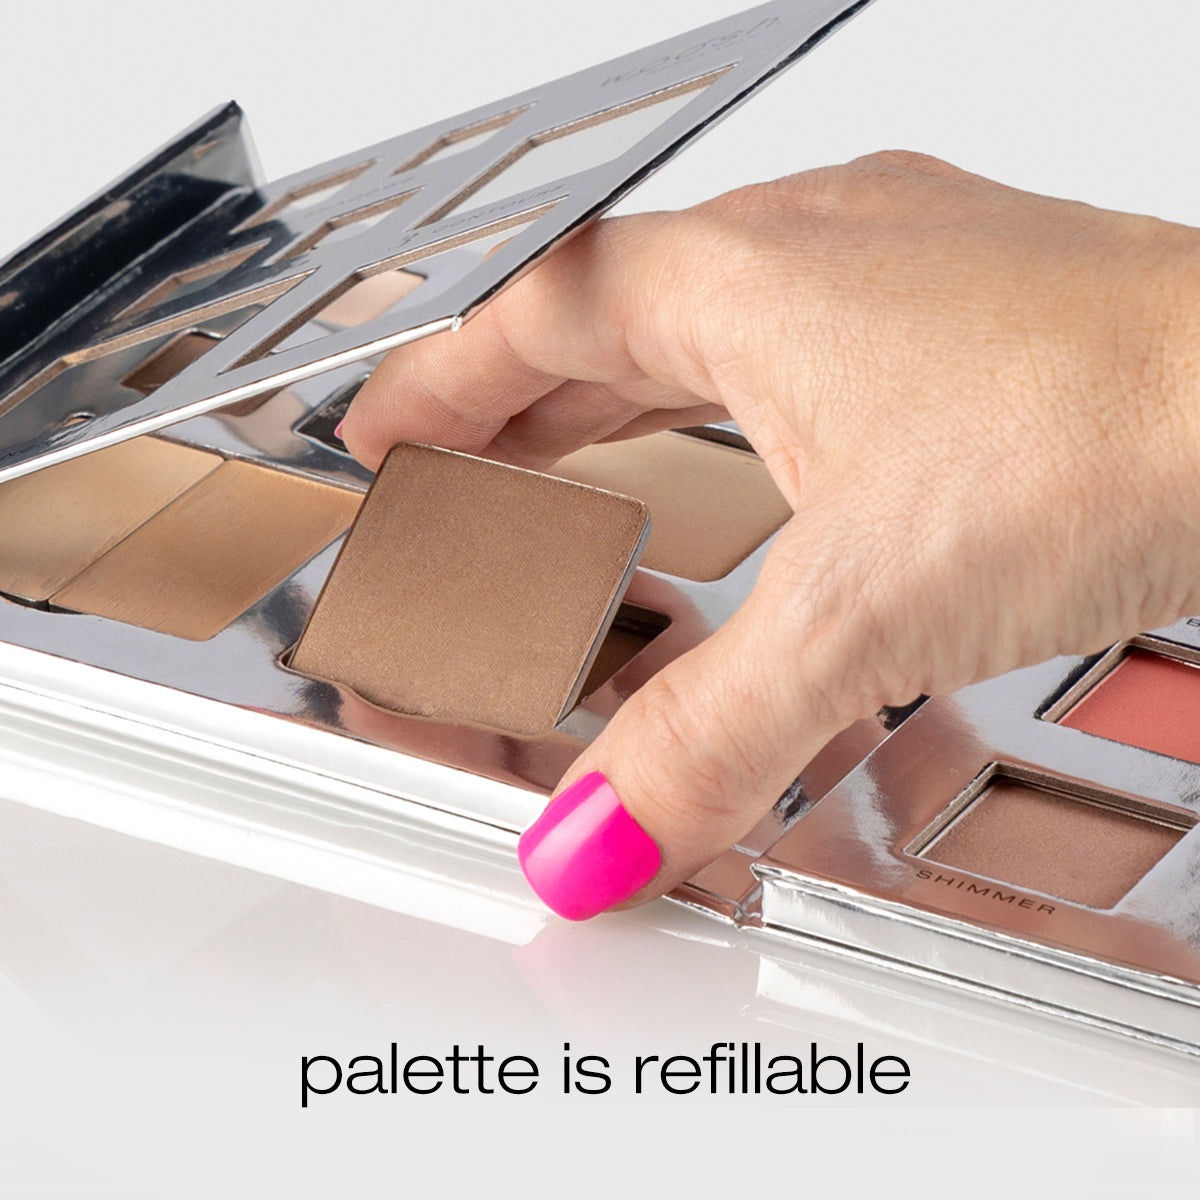 Model hand putting a pan into the palette showing it is refillable